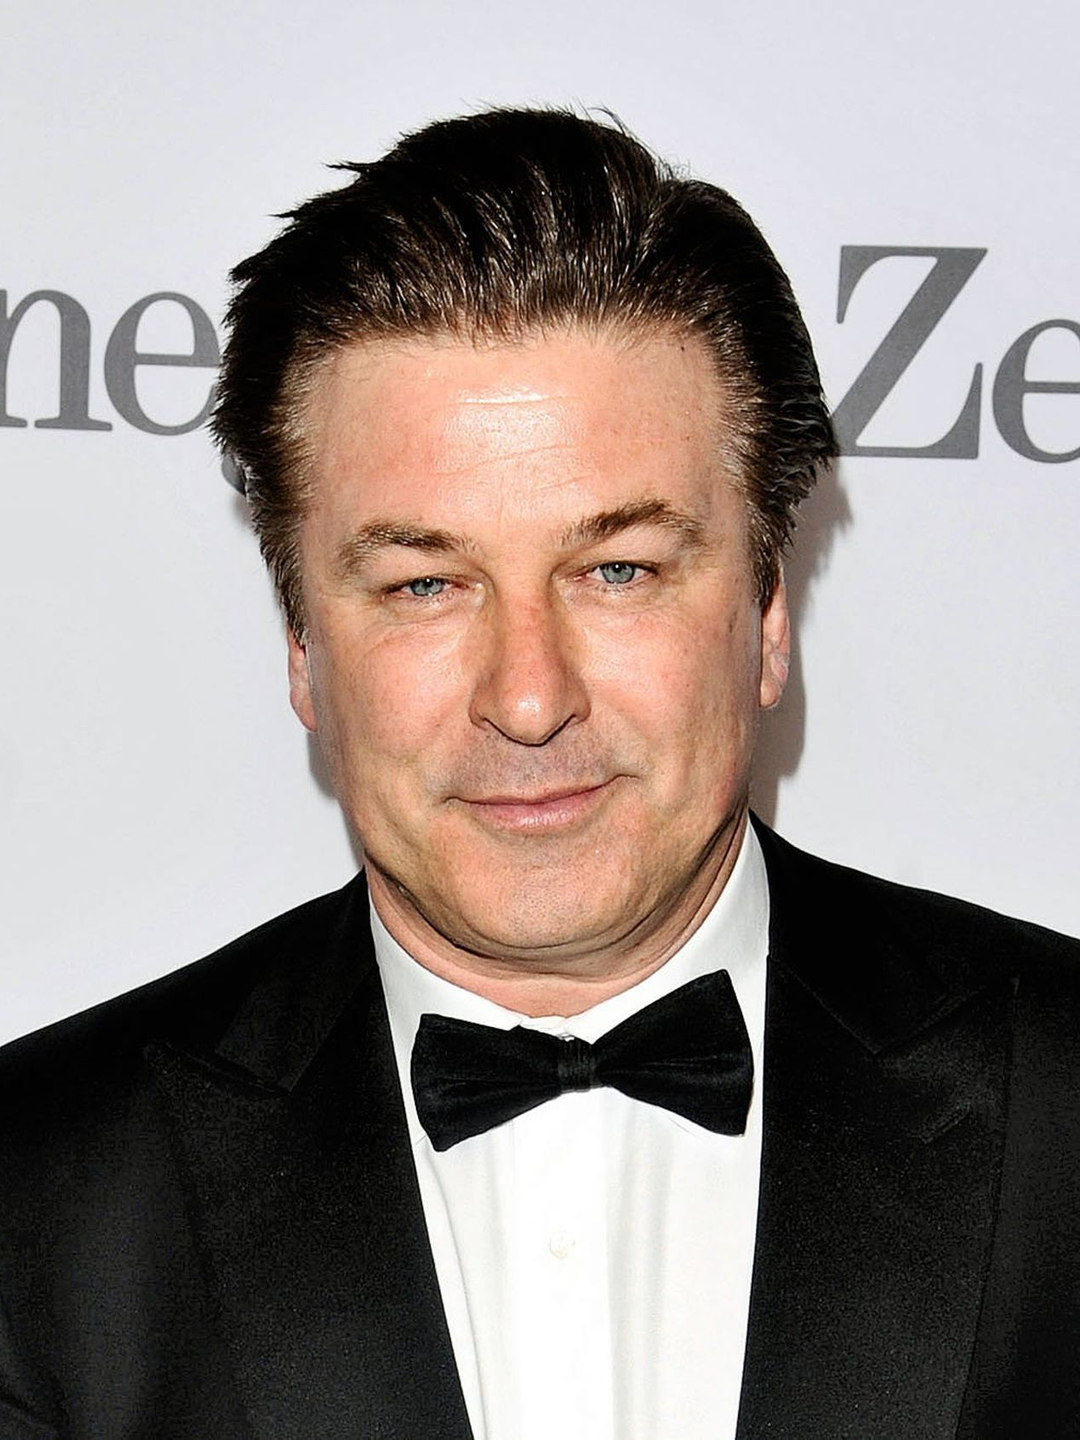 Alec Baldwin does he have a wife